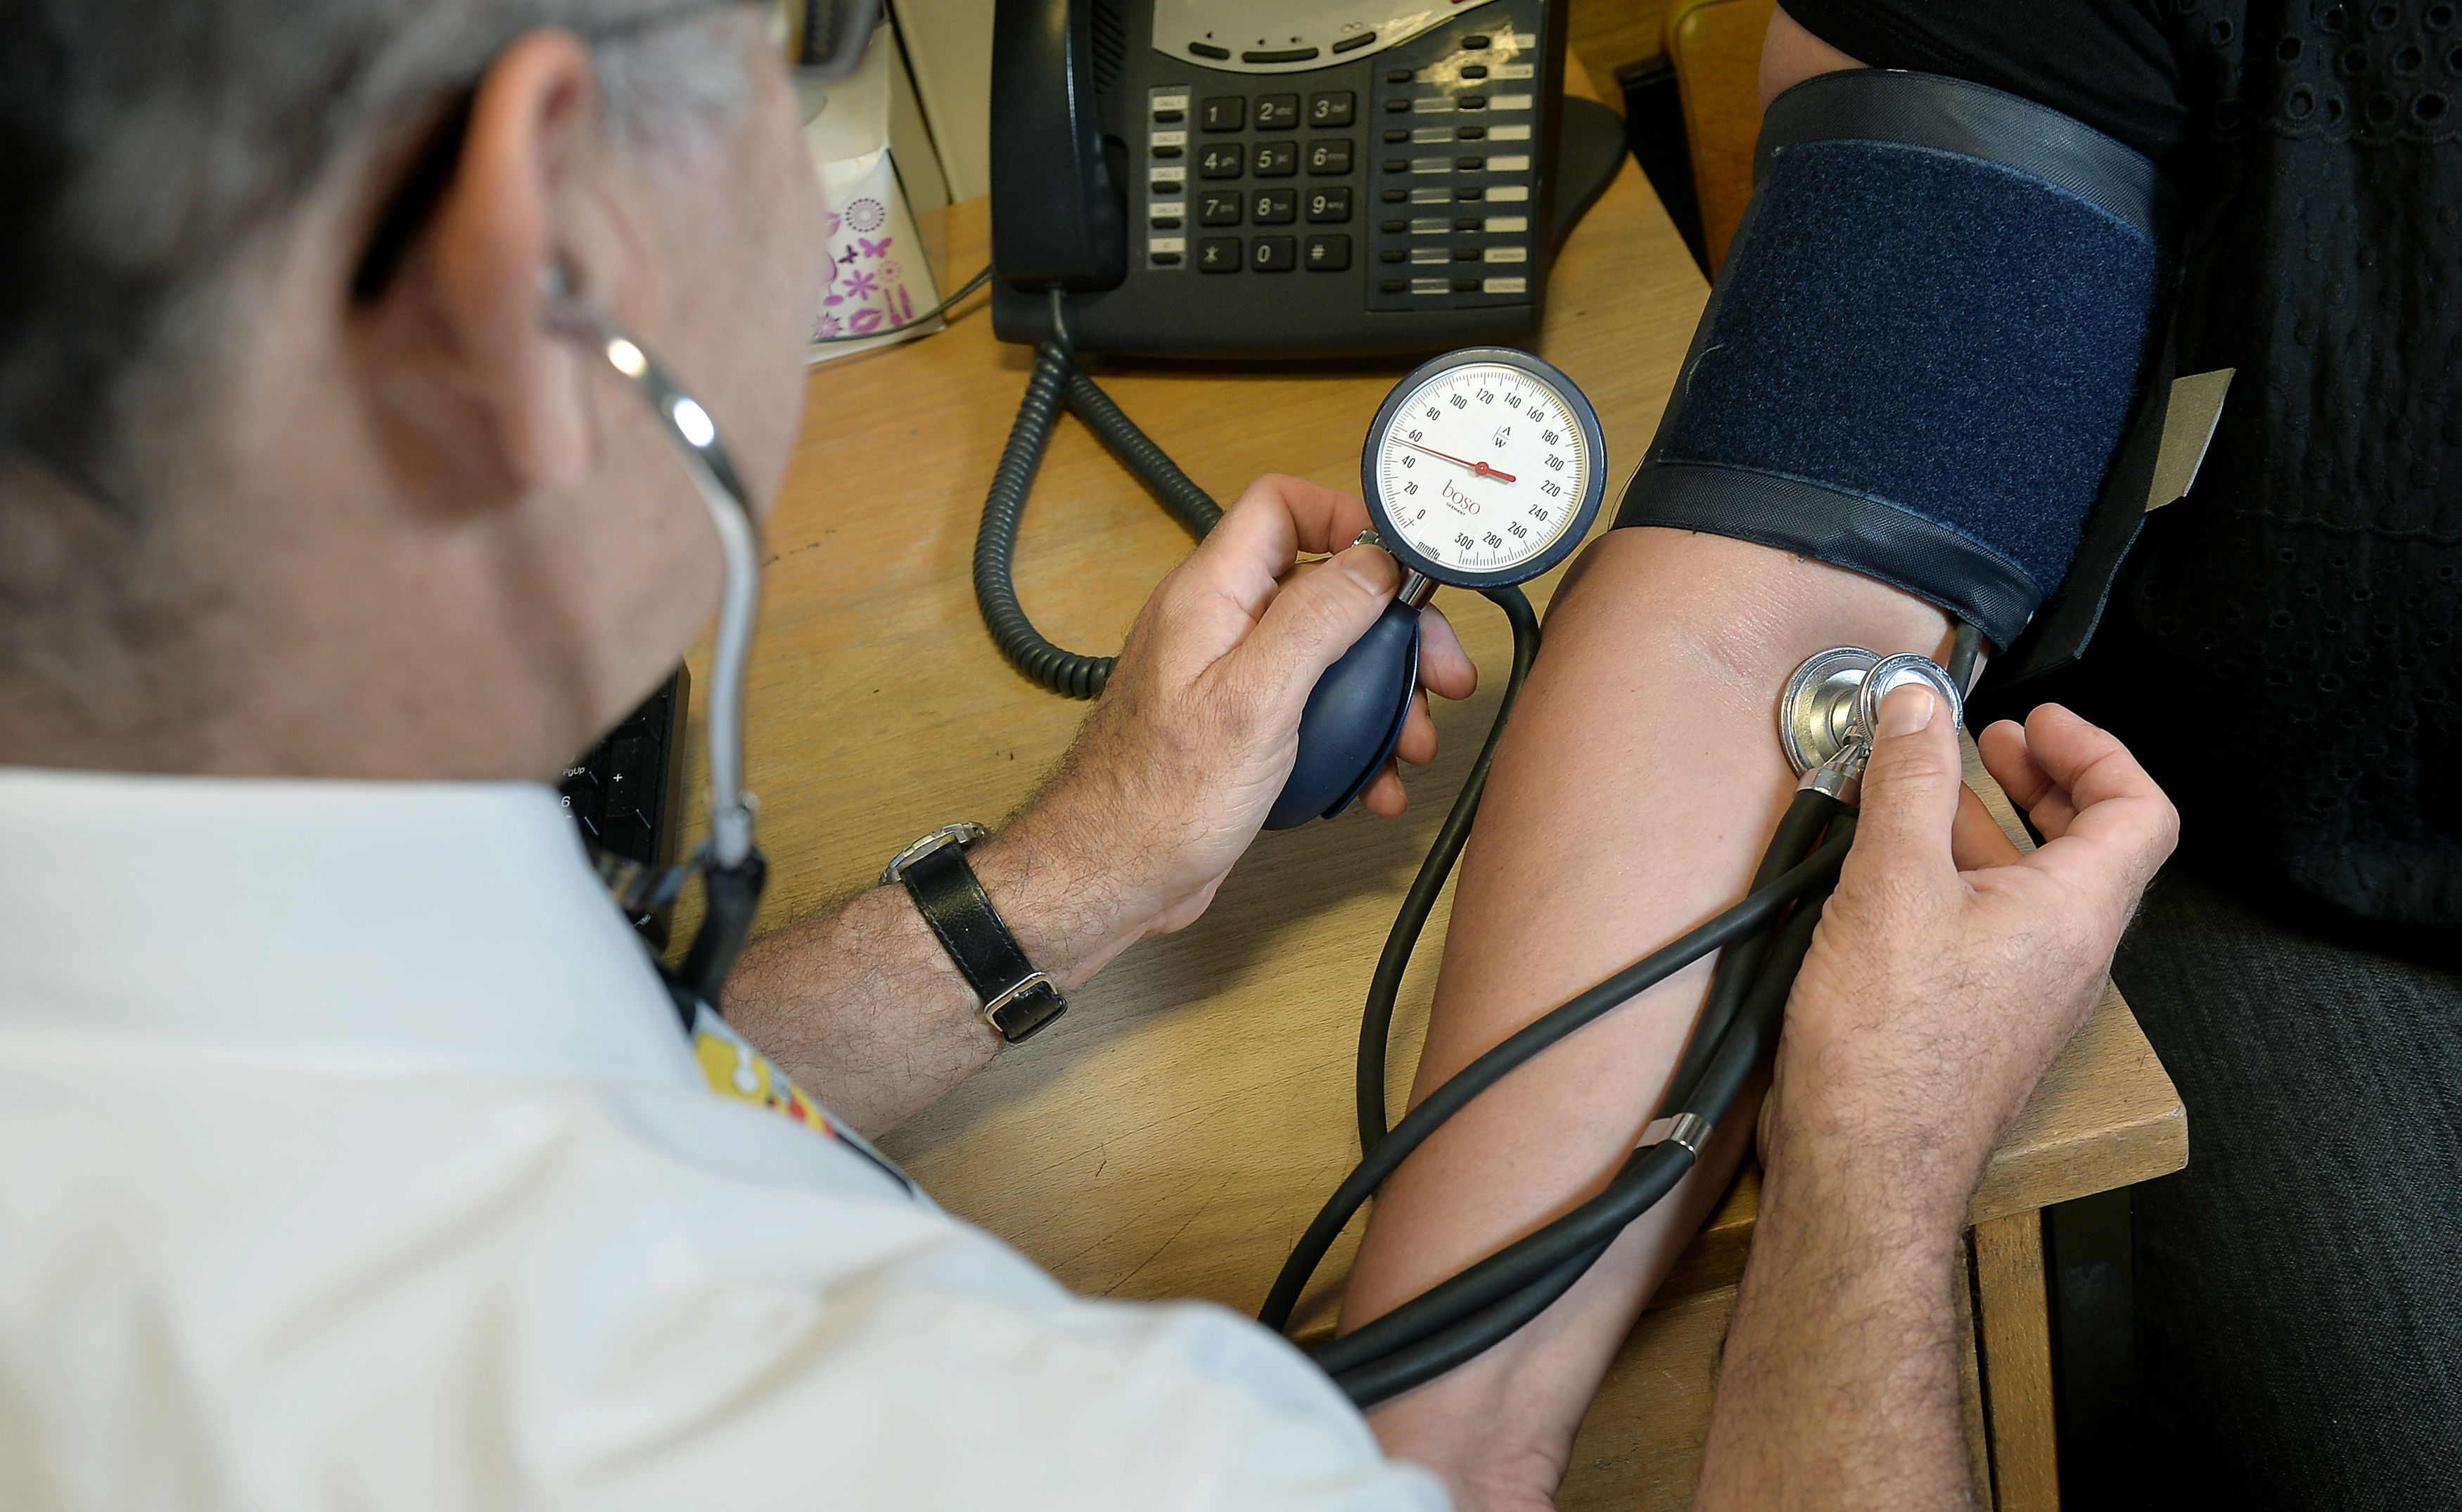 GP checking a patient's blood pressure.